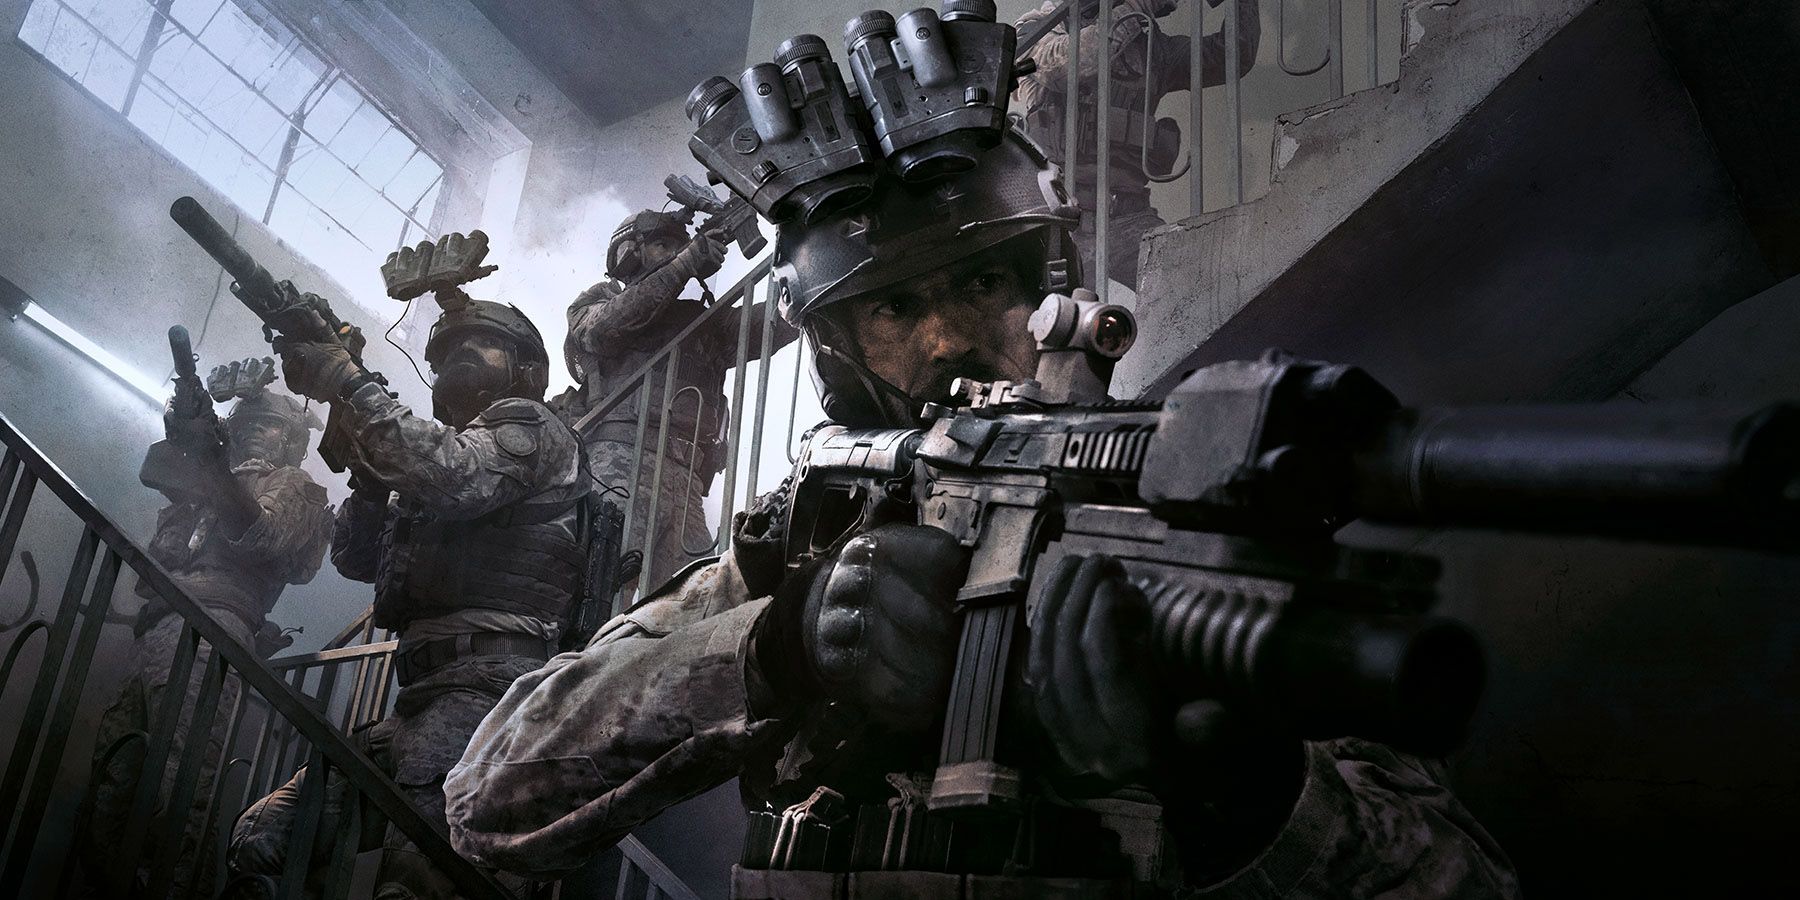 Review - Call of Duty: Modern Warfare (2019) review thread